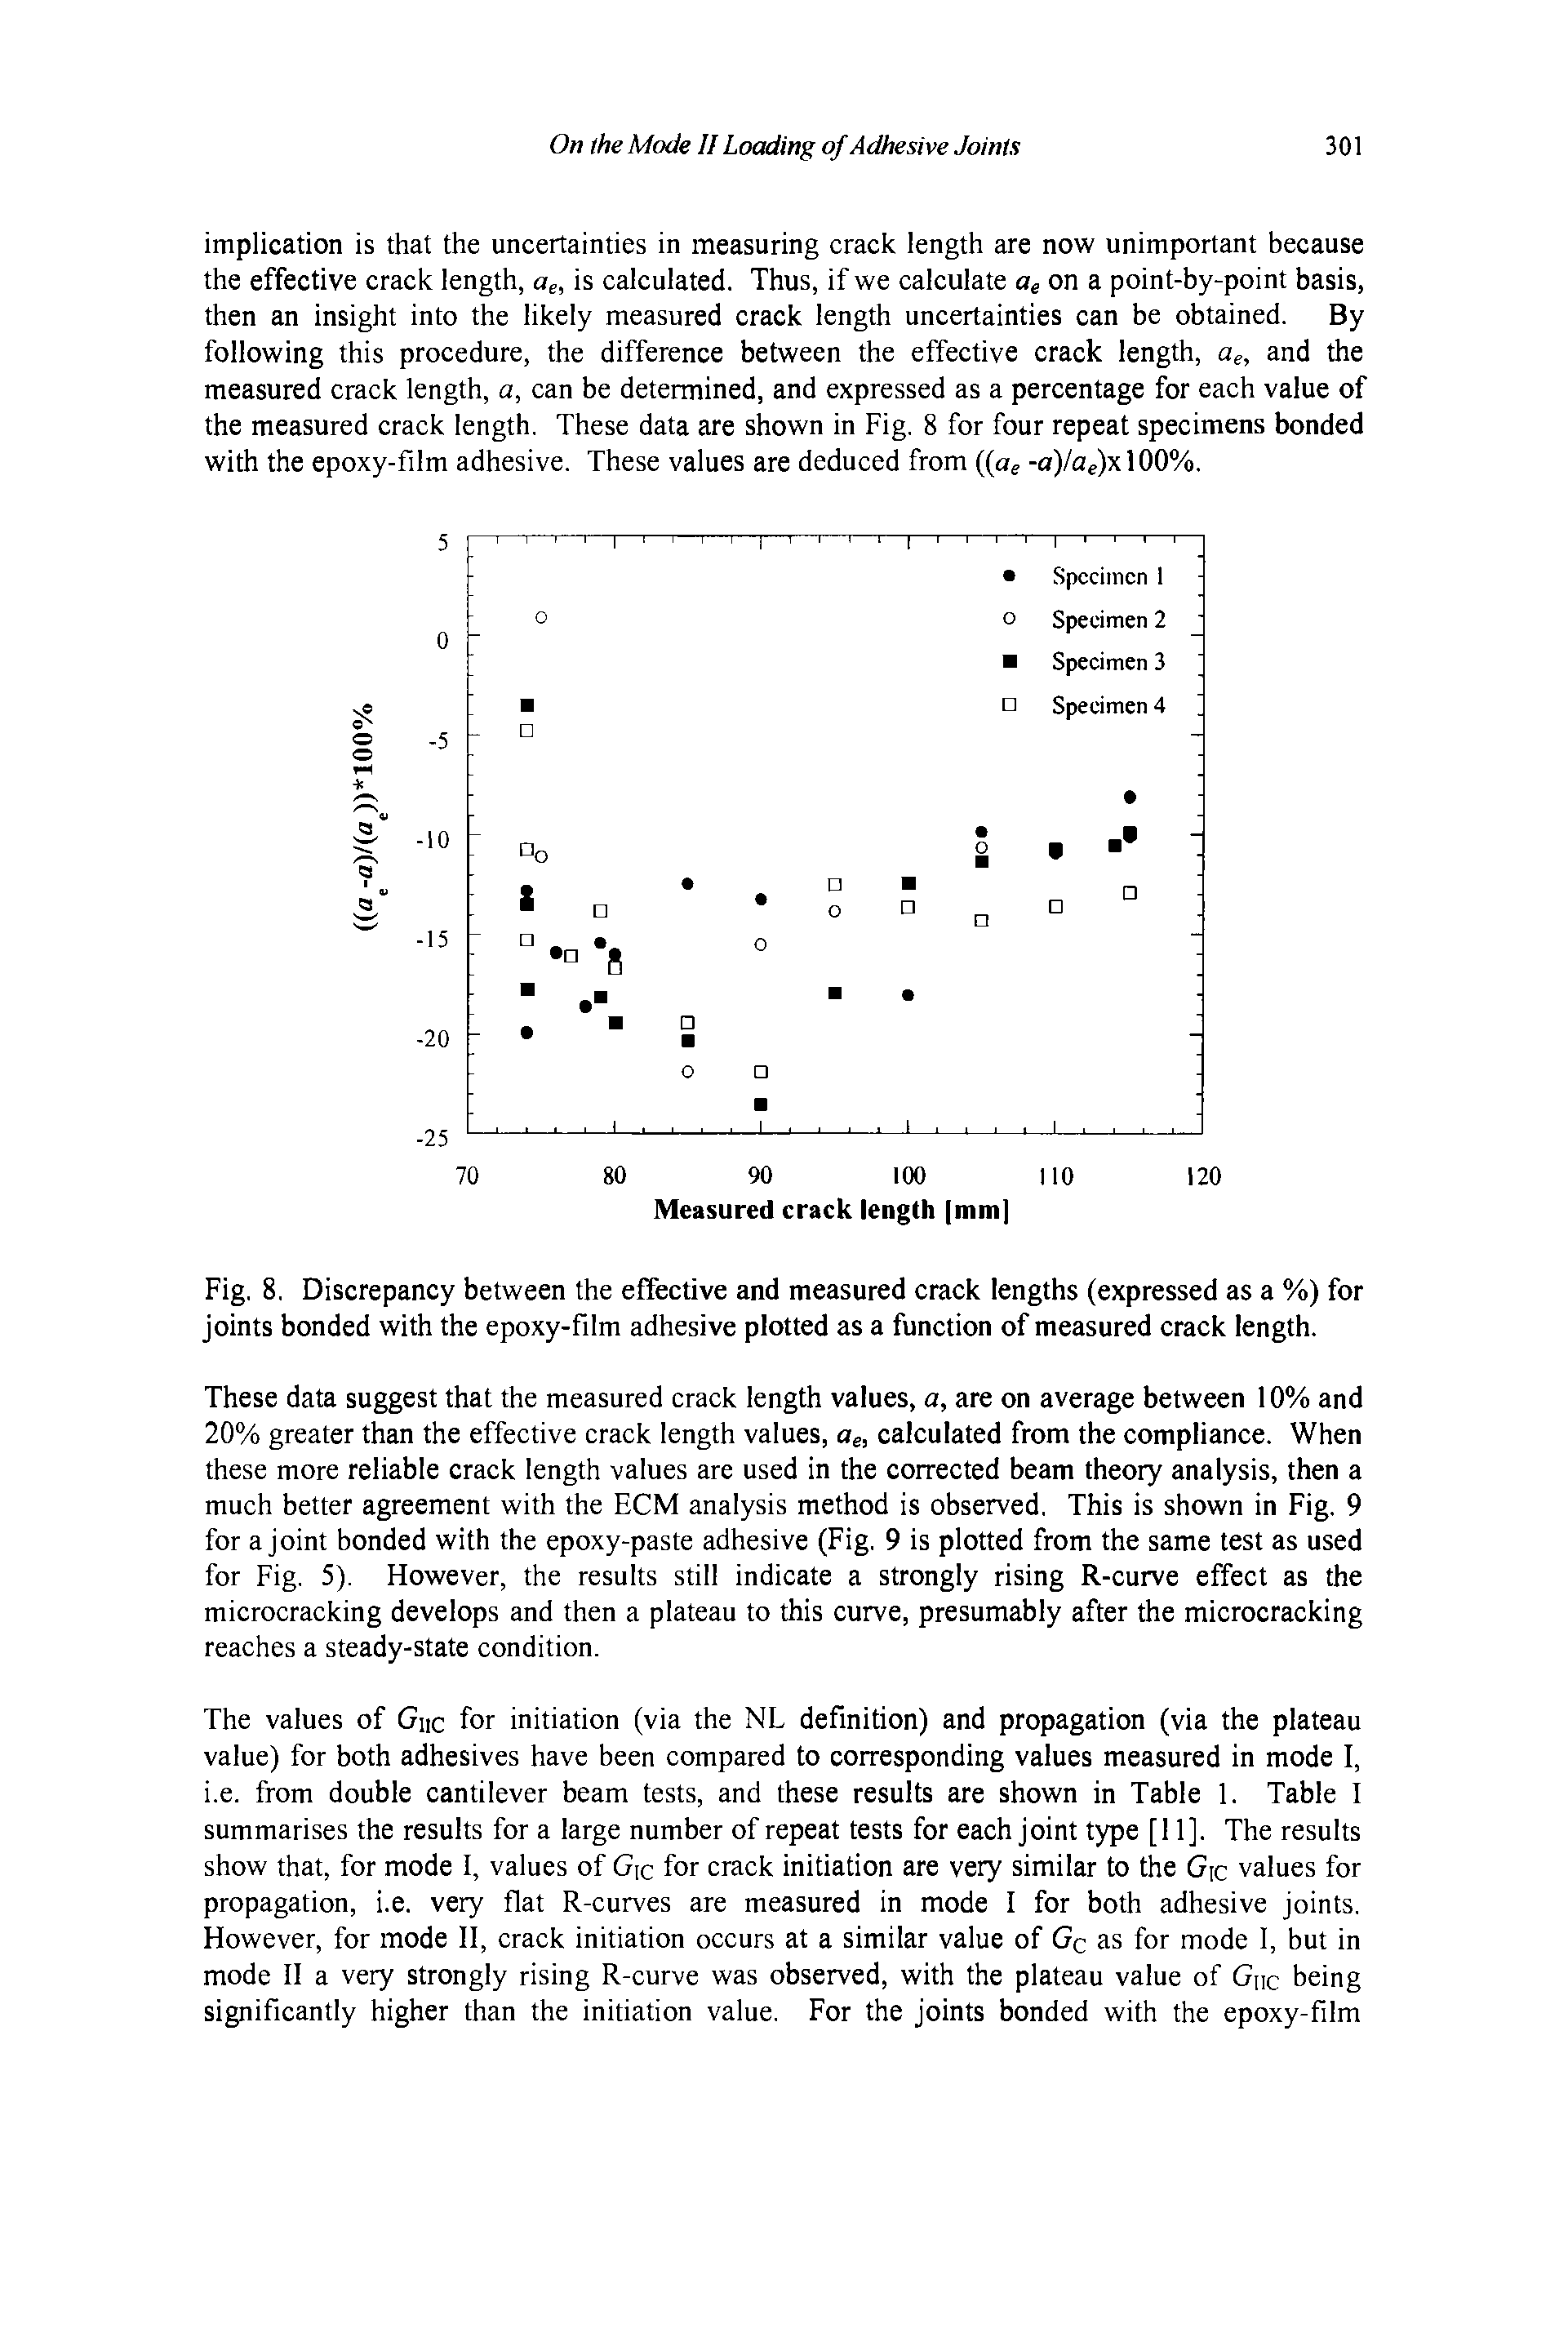 Fig. 8. Discrepancy between the effective and measured crack lengths (expressed as a %) for joints bonded with the epoxy-film adhesive plotted as a function of measured crack length.